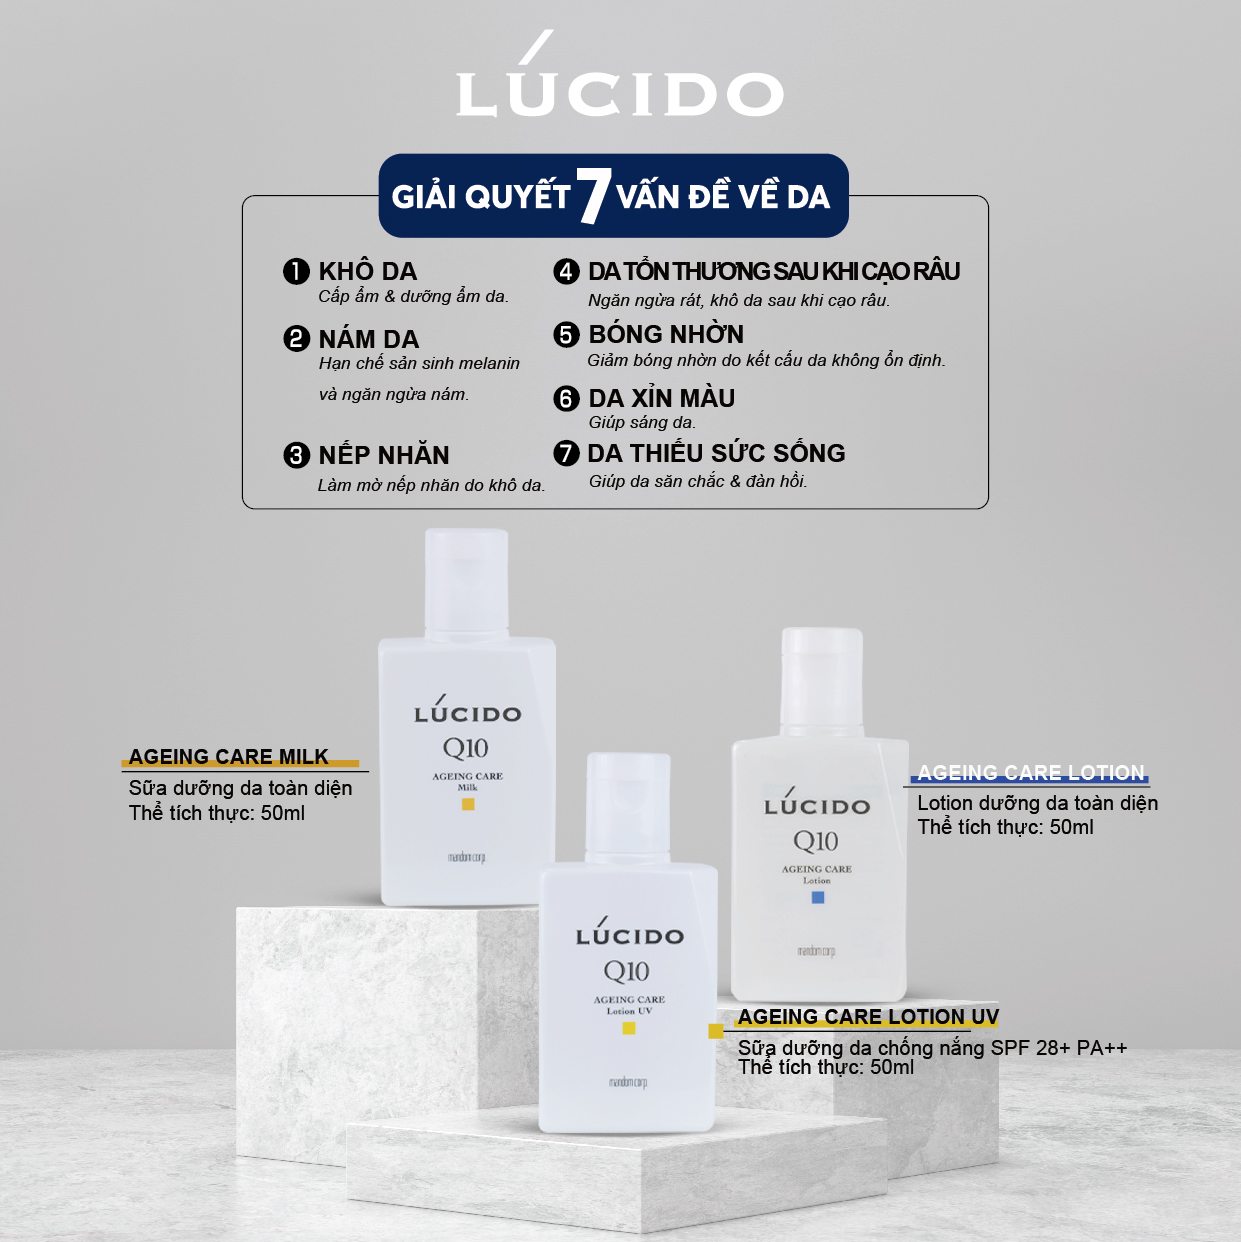 Lucido Ageing Care Lotion UV N